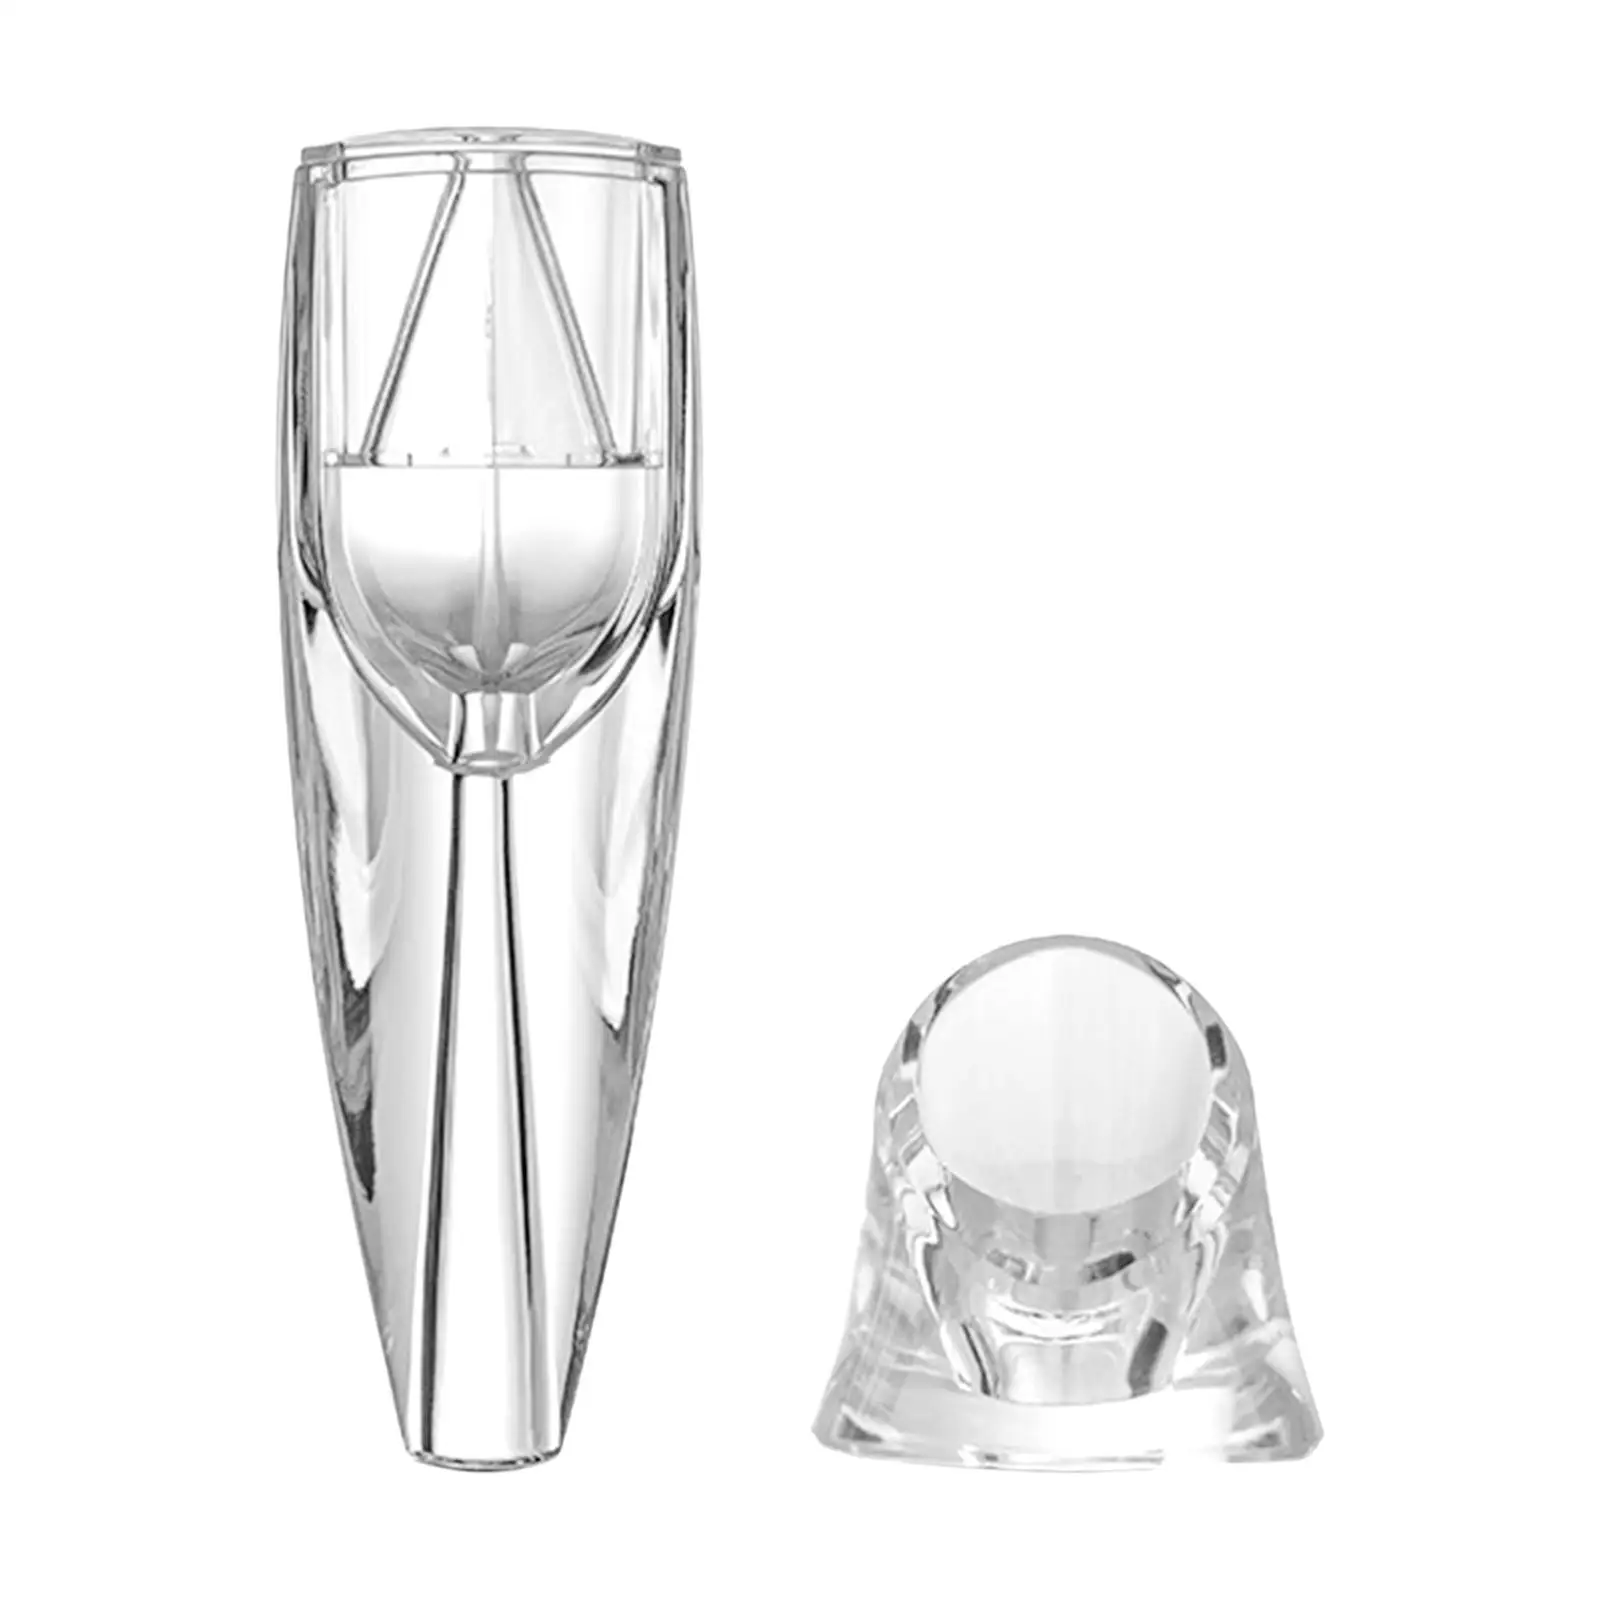 Transparent Quick Decanter Hand Held Carafe Acrylic for Party Outdoor Men